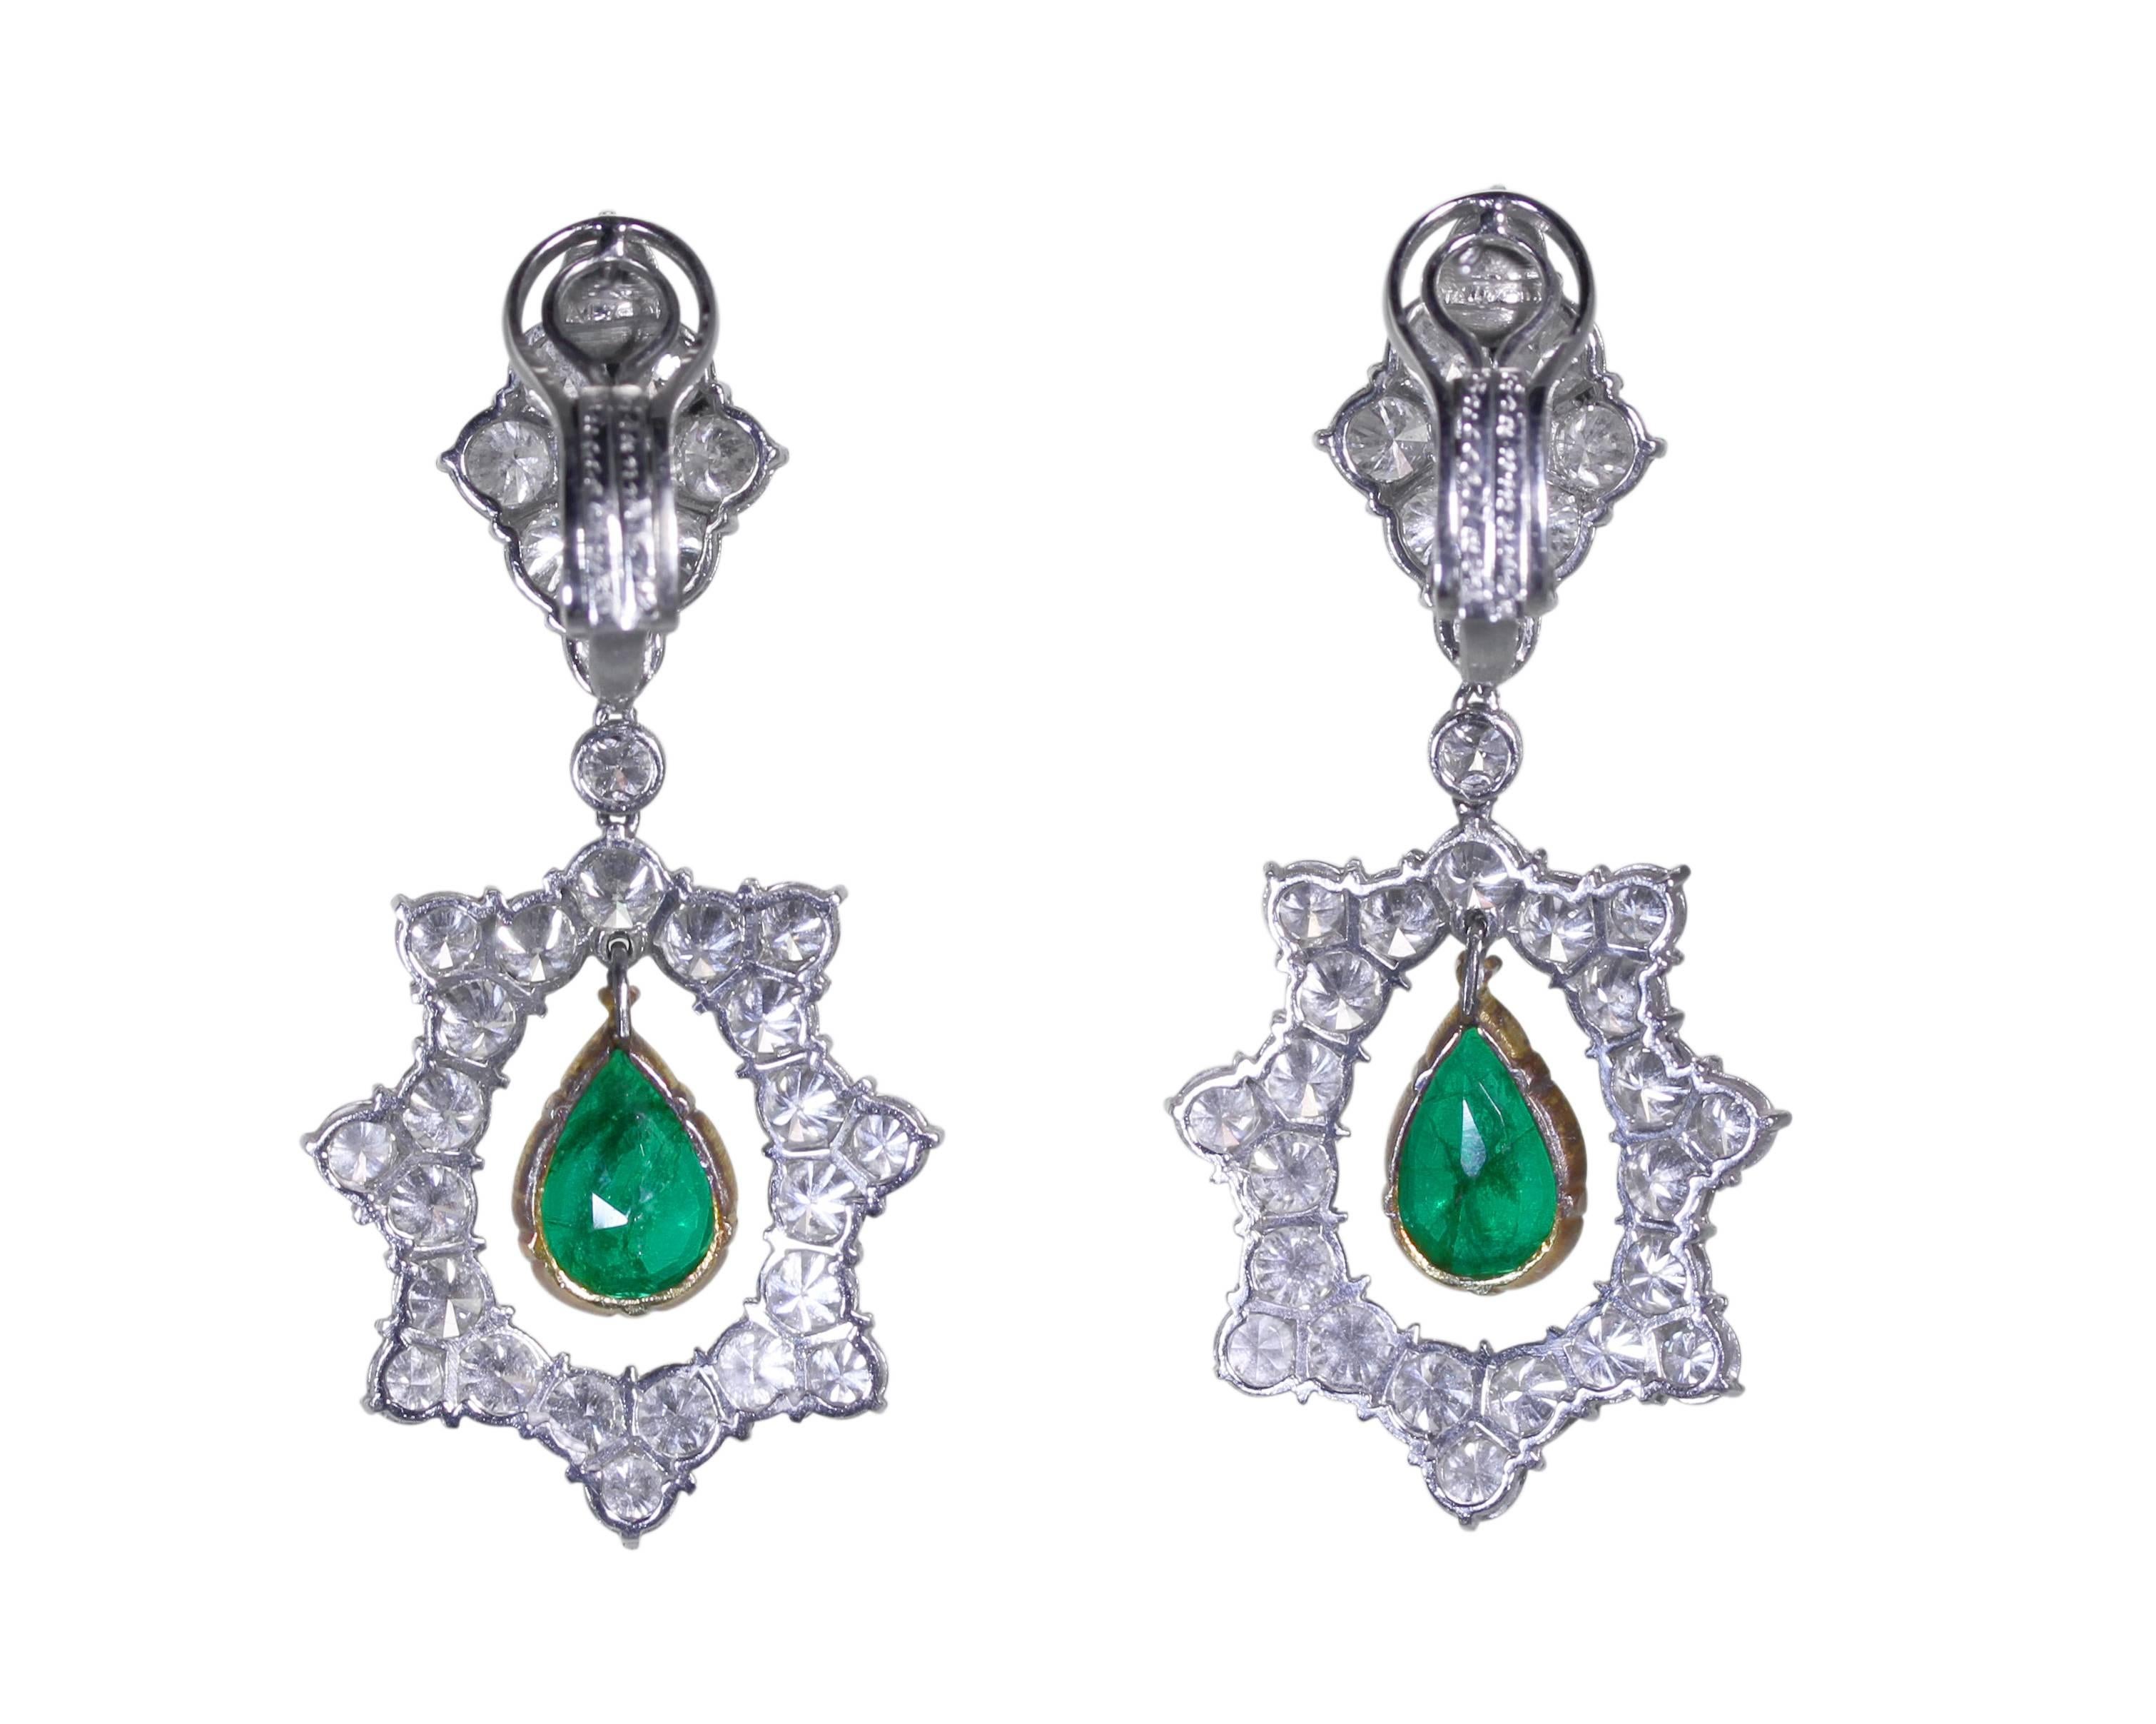 A pair of 18 karat white and yellow gold, emerald and diamond earclips by Buccellati, Italy, suspending 2 pear-shaped emeralds weighing approximately 3.50 carats, in an openwork frame set with 64 round diamonds weighing approximately 11.00 carats,